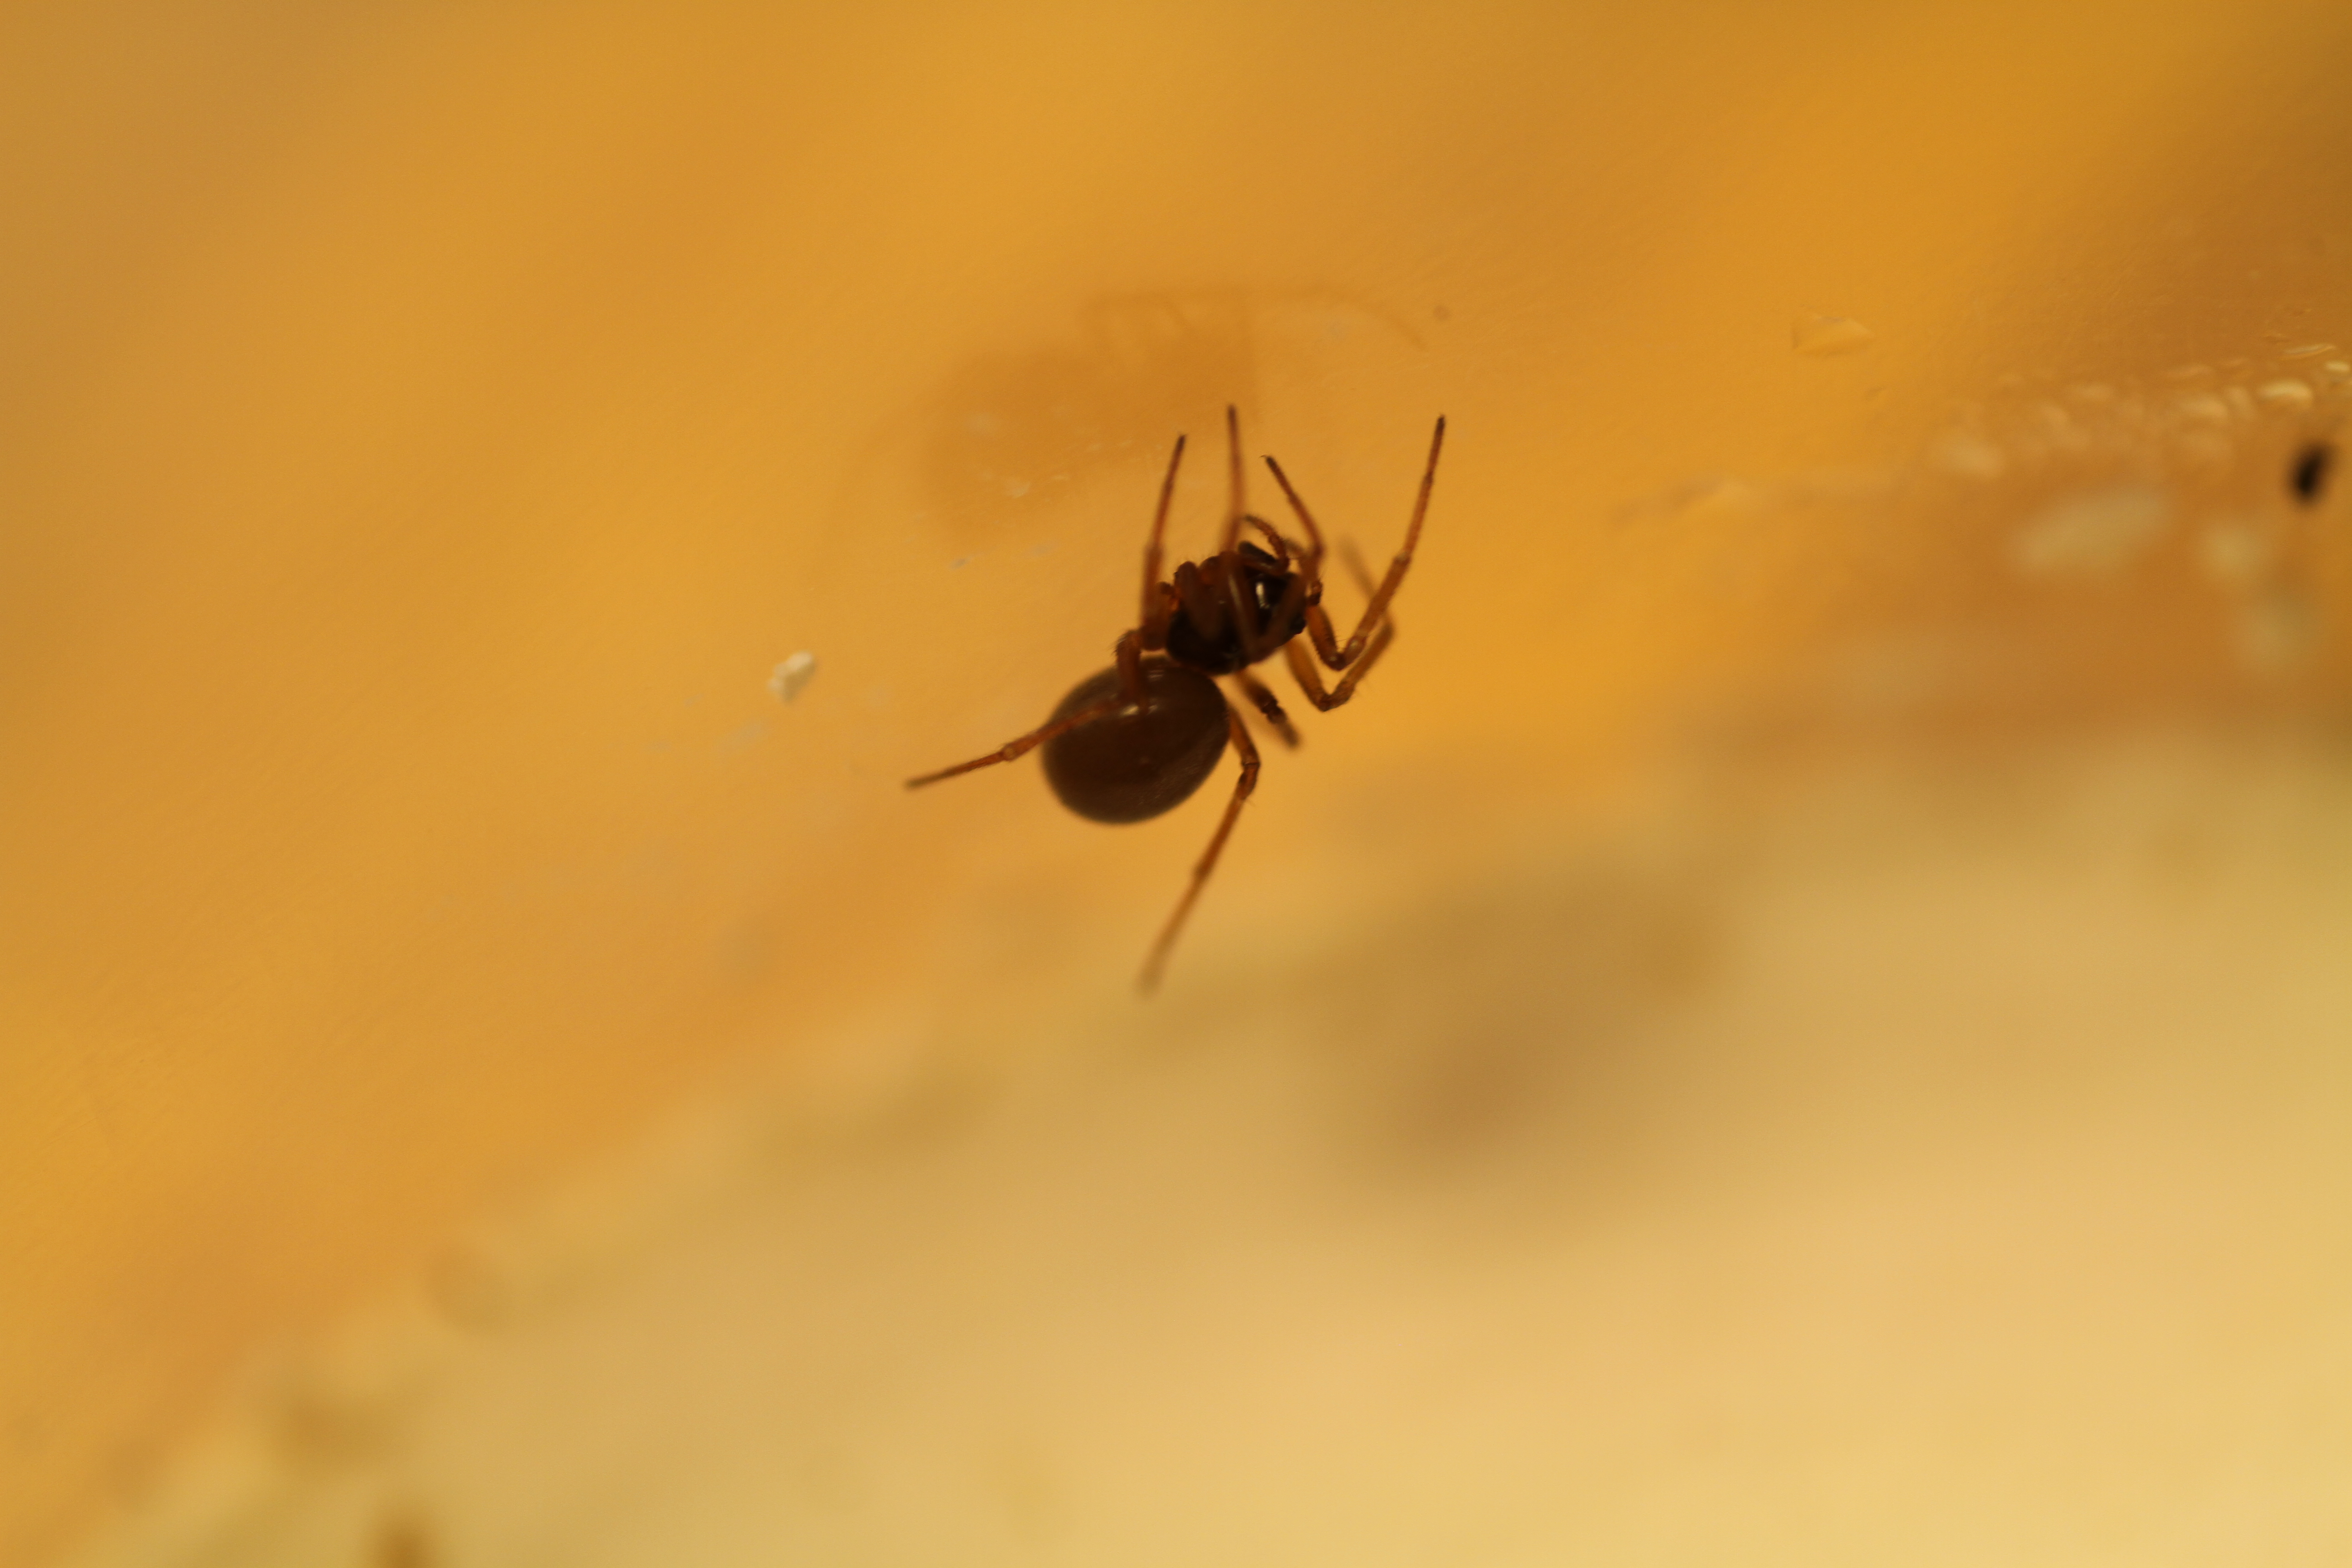 A small dark spider on its web, hanging from below. The background is orange-ish because of the lighting.